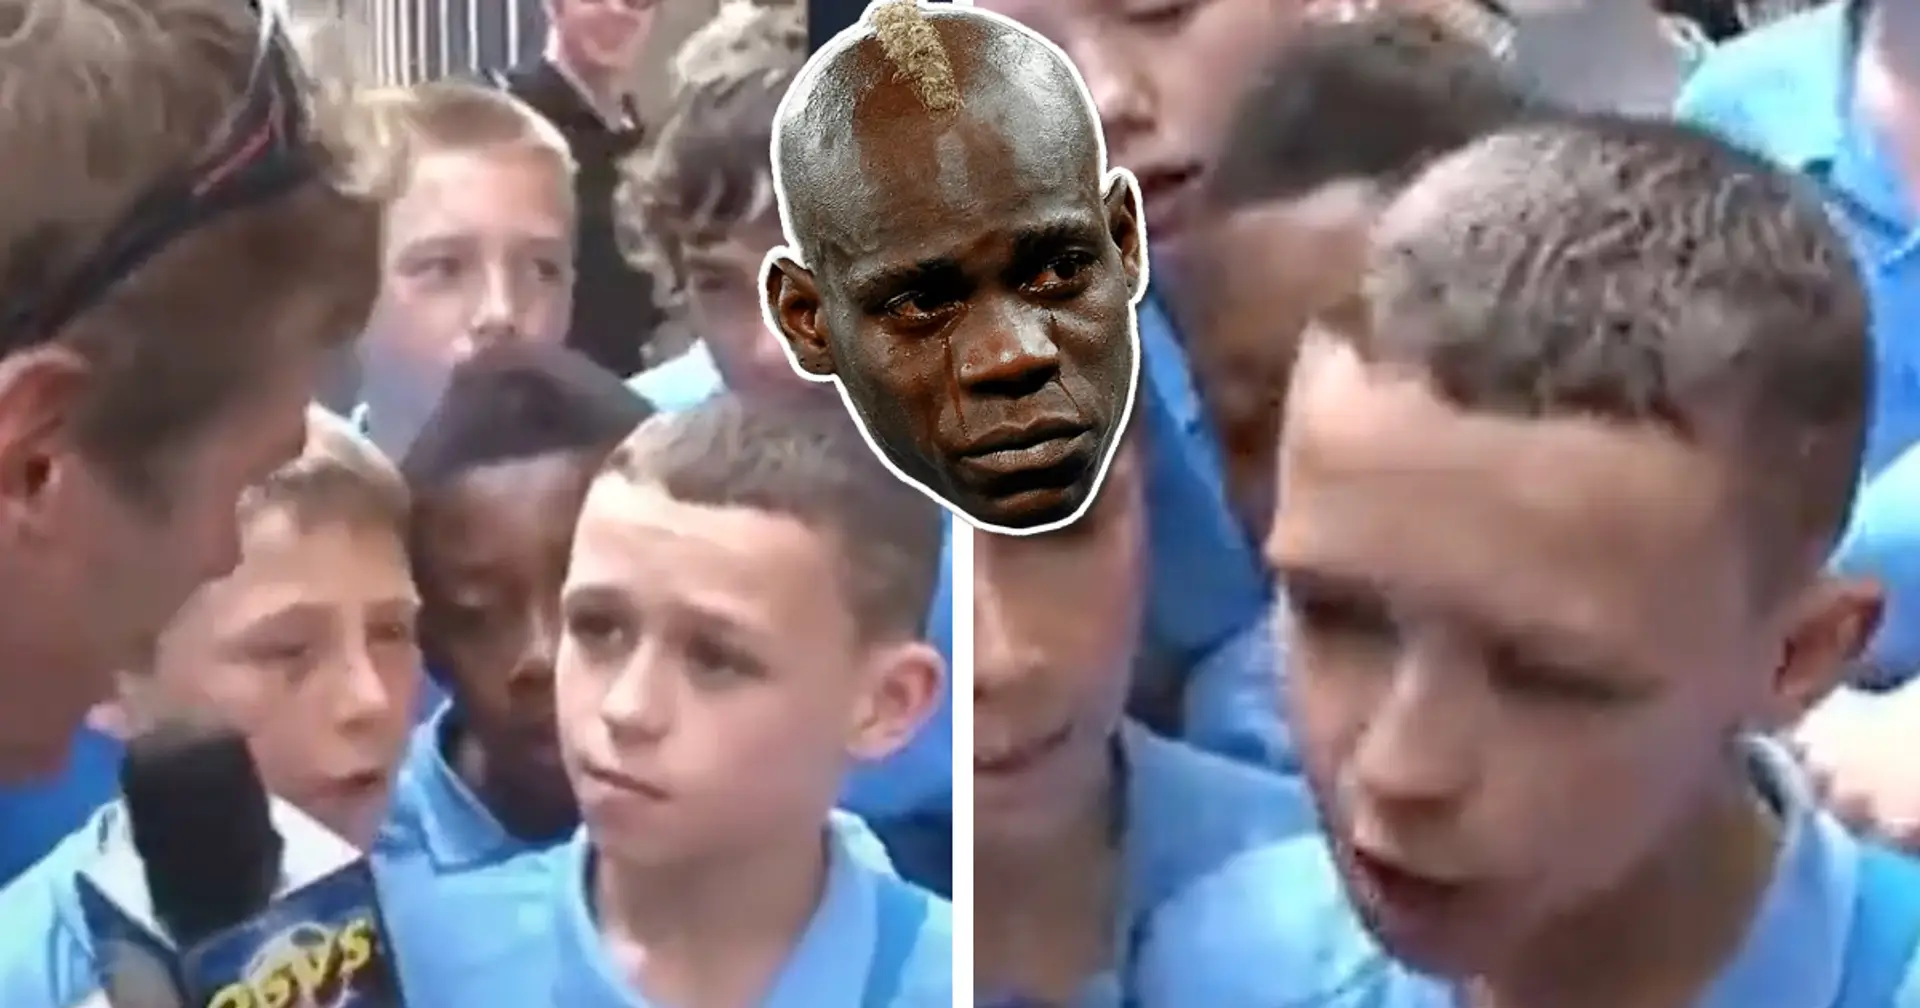 ‘He’s got a bad attitude’: A 10 year-old Phil Foden criticizes Mario Balotelli for his behaviour